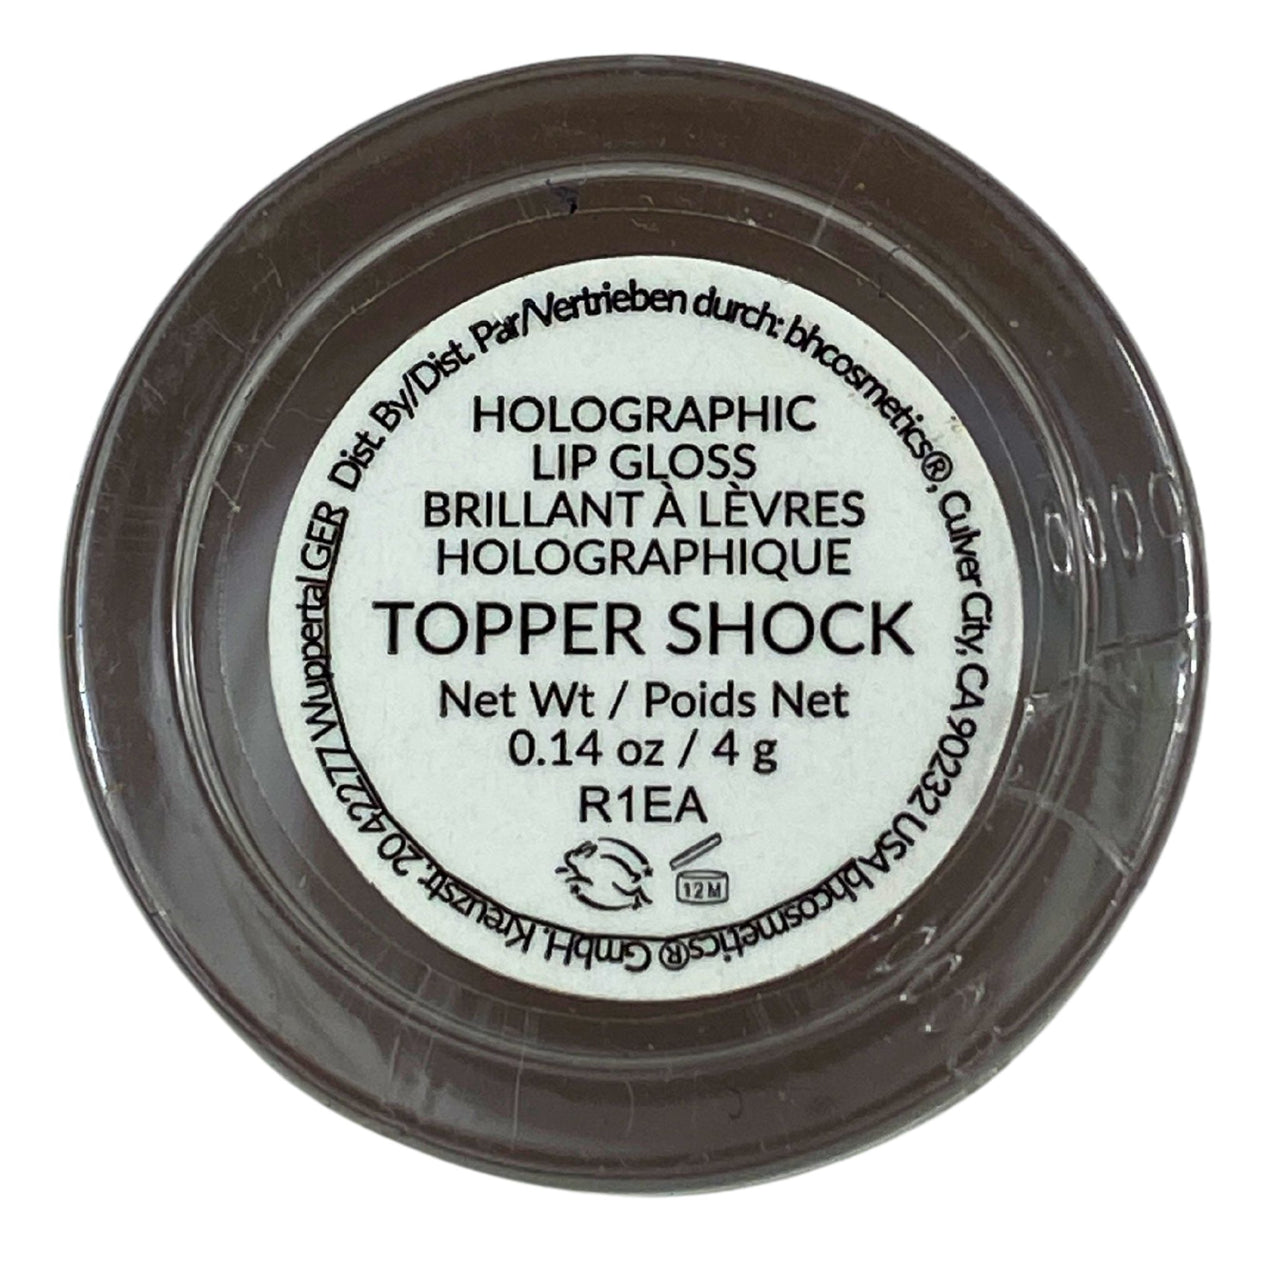 BH Cosmetics Topper Shock Poison Shock Holographic Lip Gloss